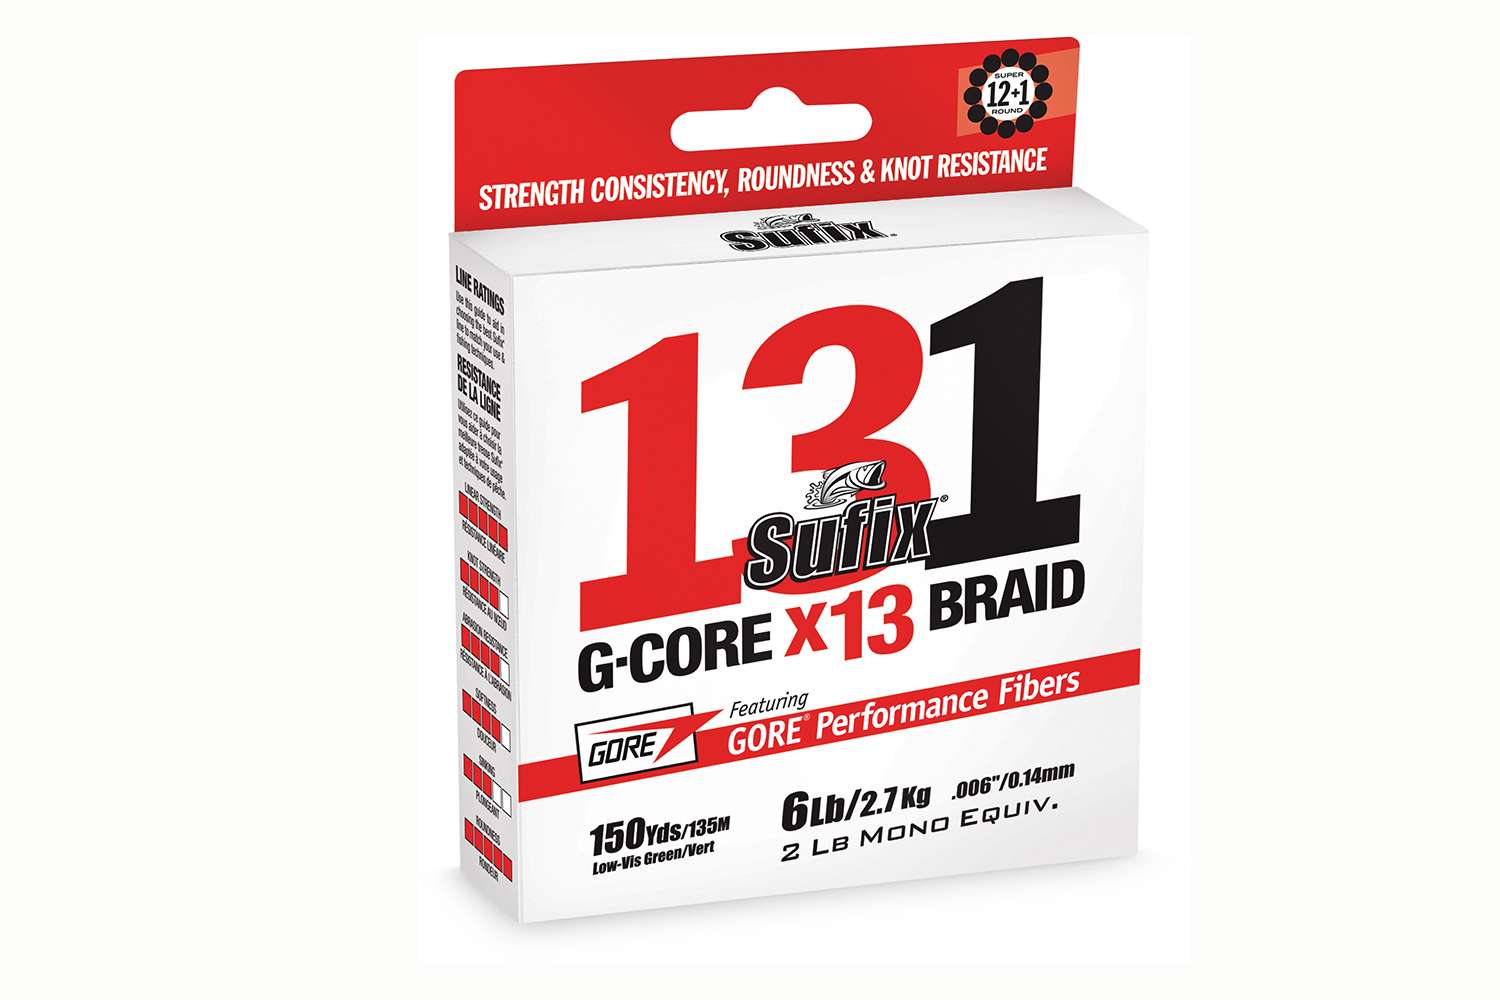 <p><b>Sufix 131 Braid</b></p>
<p>The smoothest, quietest and most reliable braid ever made. The knot strength is a direct result of being constructed with 13 fibers (12 HMPE and 1 GORE) and is unparalleled. The single GORE fiber surrounded by 12 HMPE fibers equals âsuper roundâ line that will spoil the most discriminating fisherman. 131 is available in 150-yard spools in 6-, 10-, 20-, 30-, 40-, 50-, 65- and 80-pound tests. </p>
<p><a href=